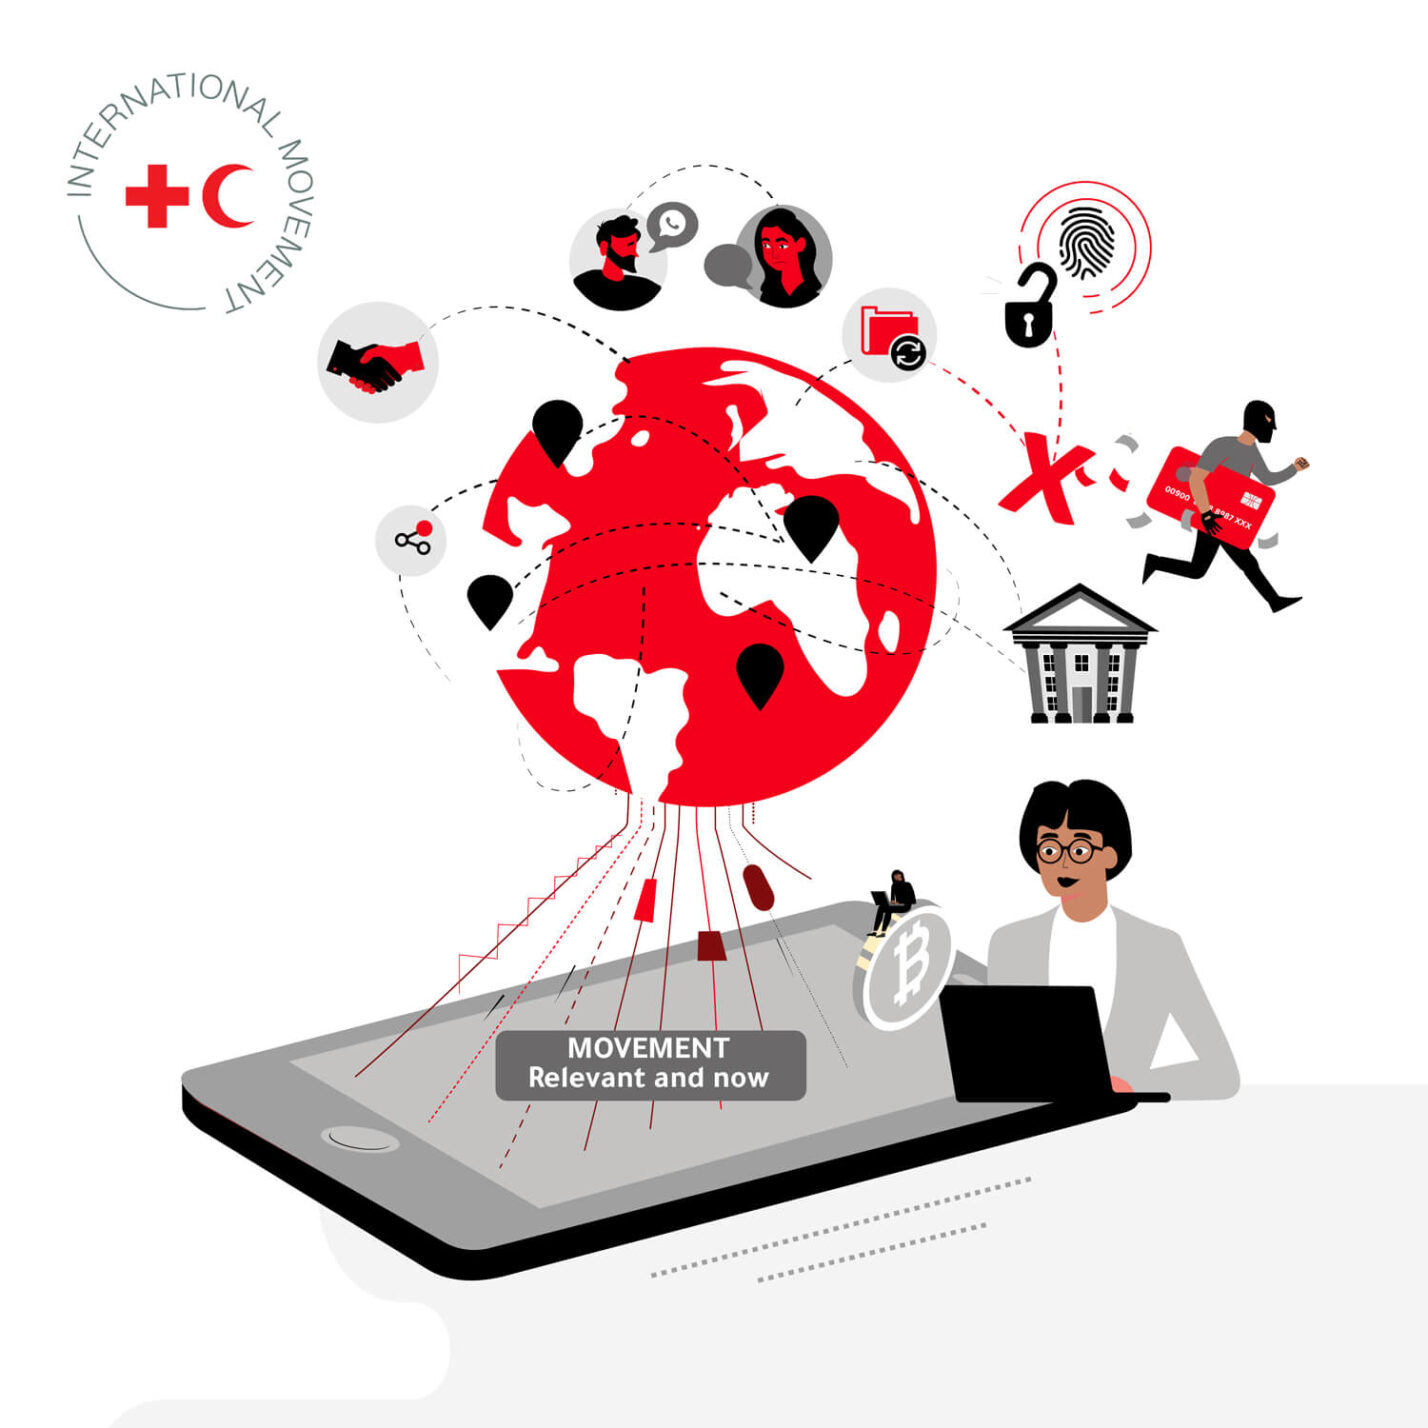 Red Cross illustration on digital security and fraud